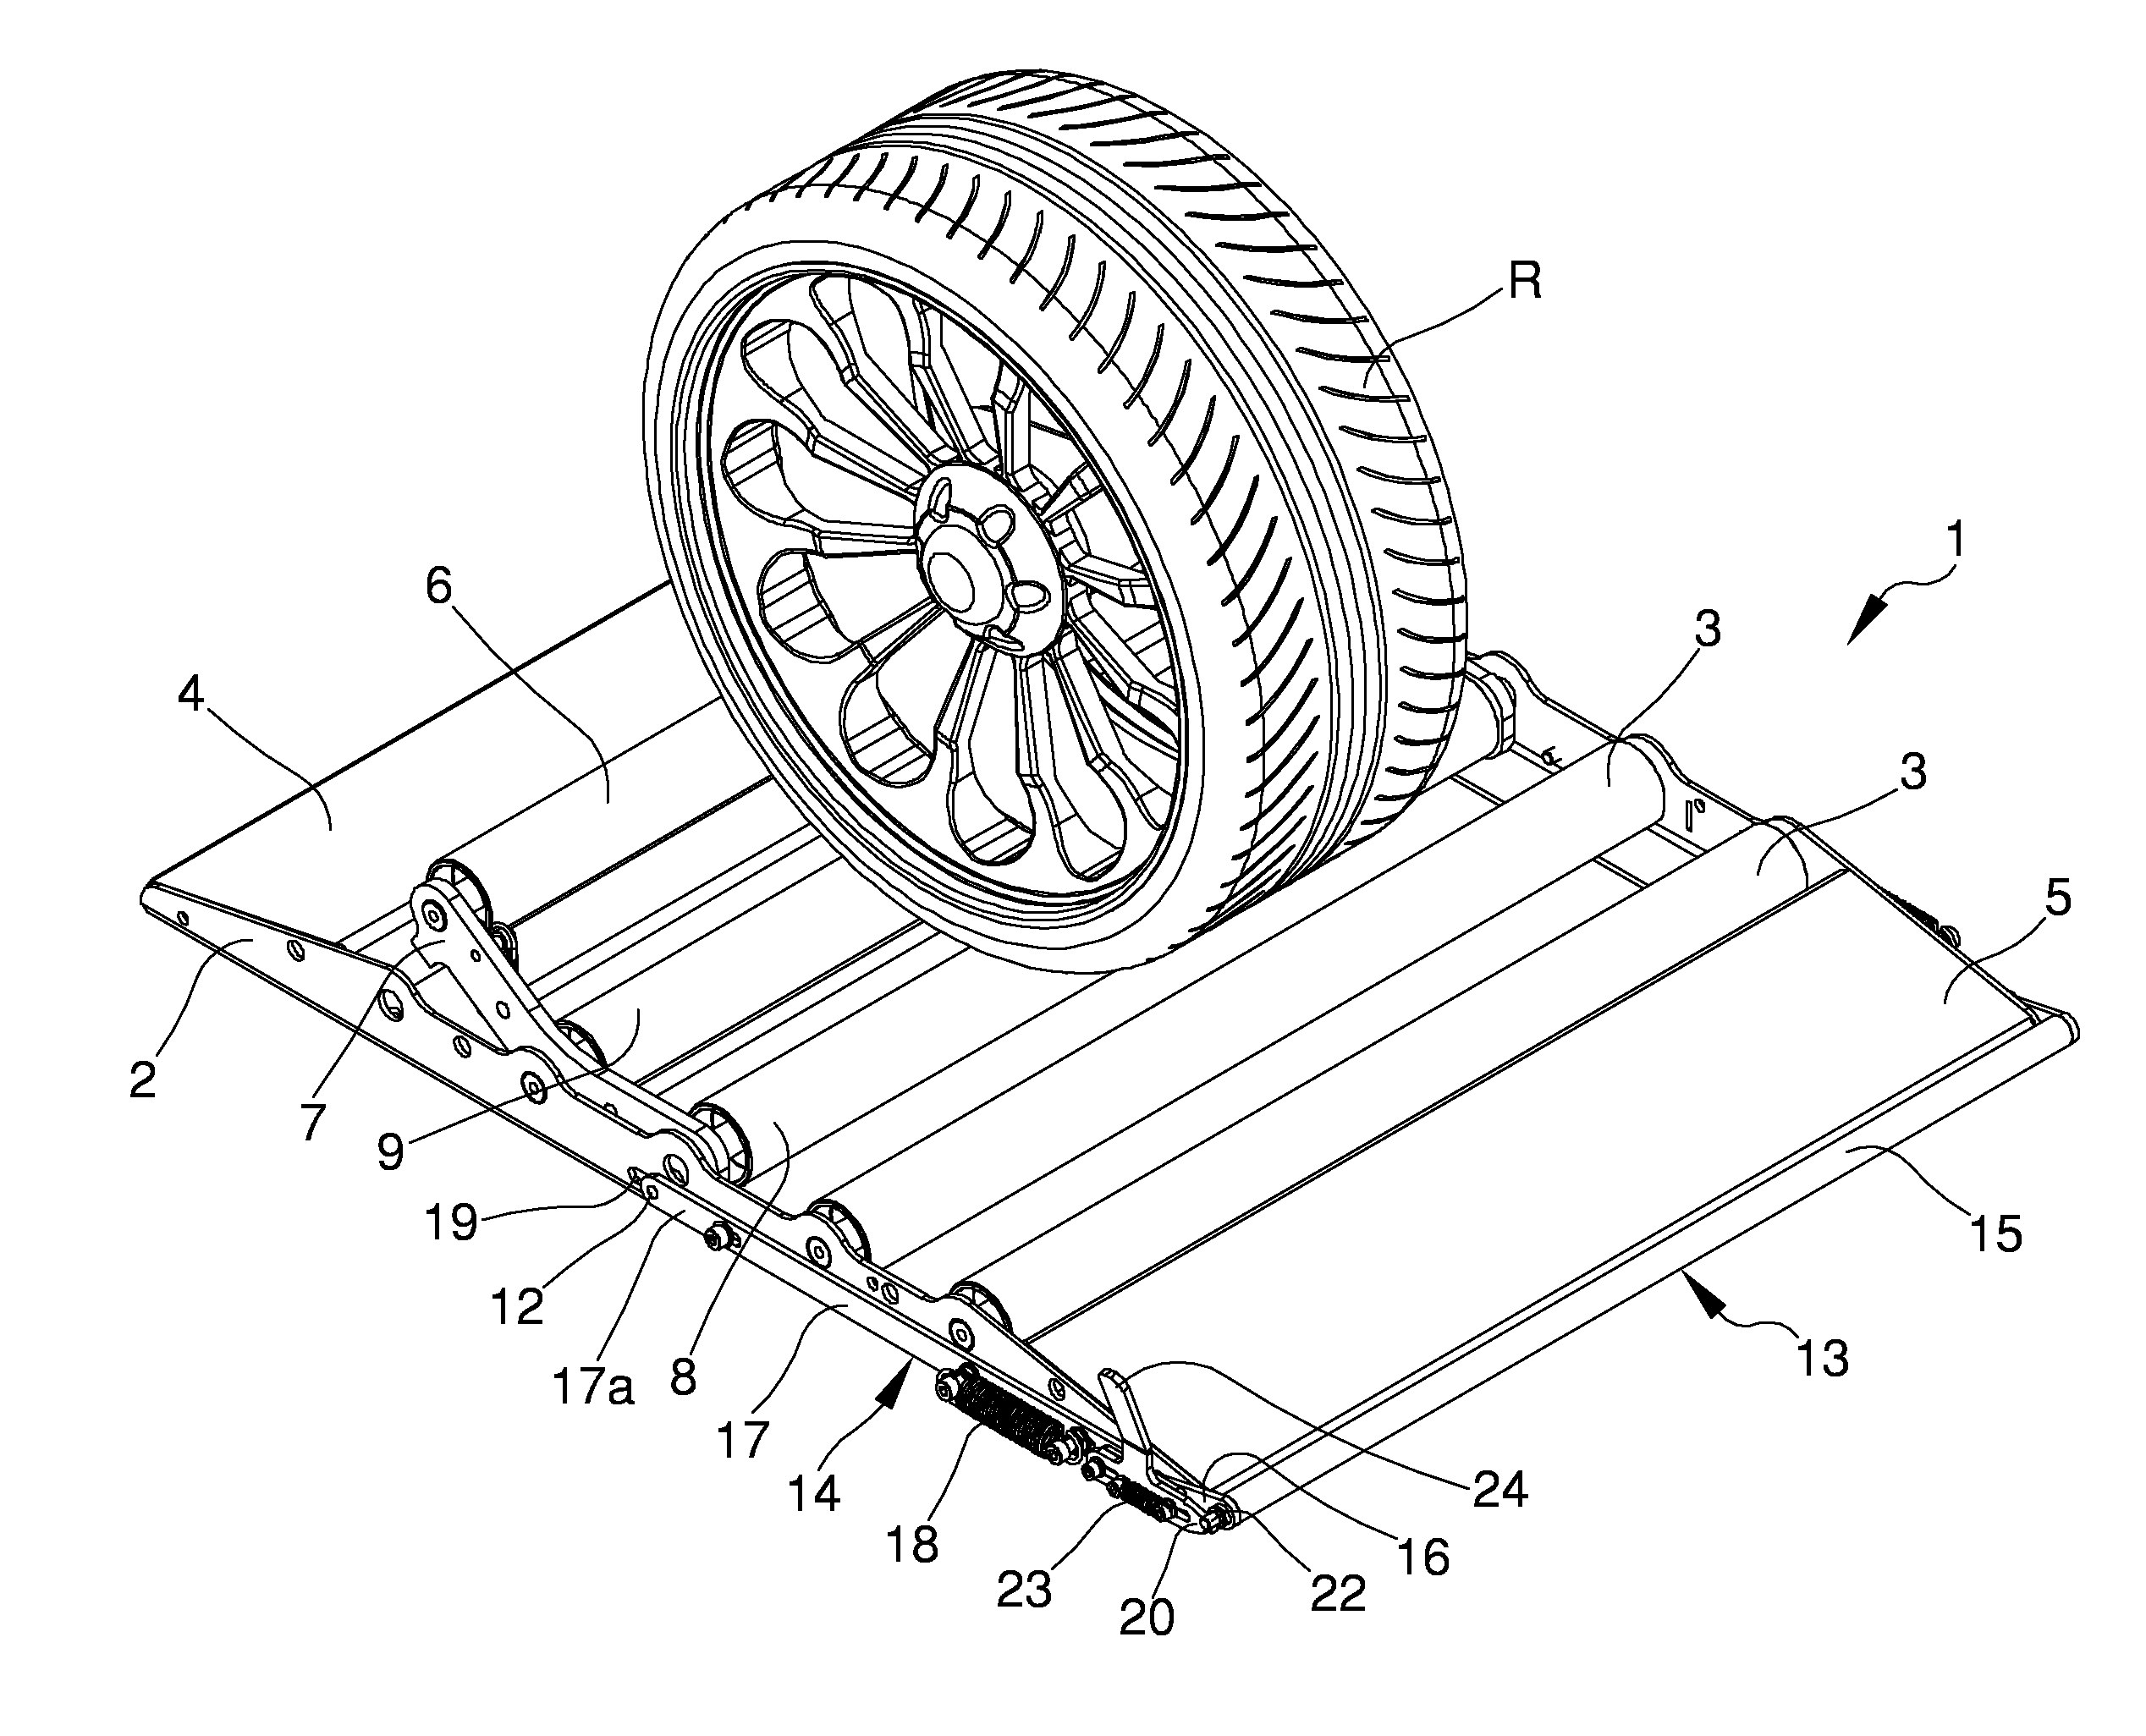 Equipment for test stands of the braking system of vehicles, in particular for four-wheel drive vehicles